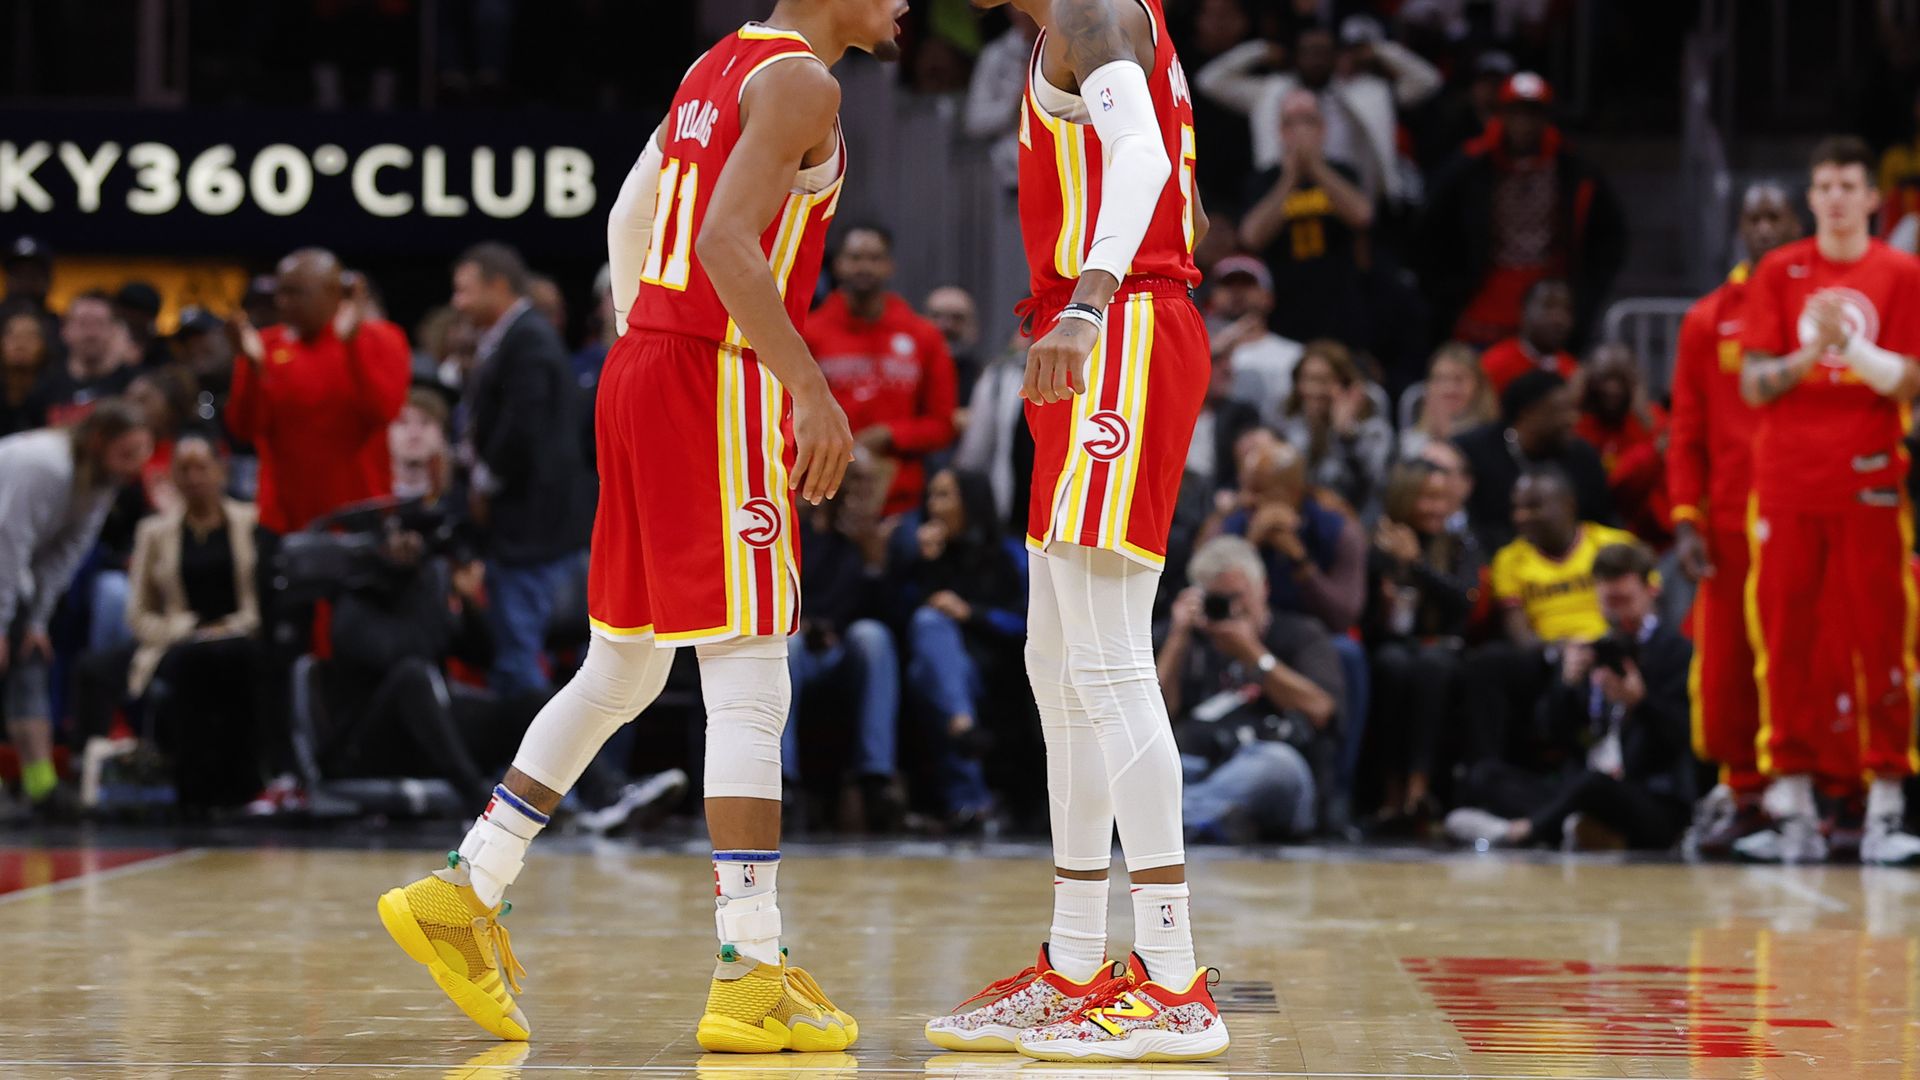 TrTrae Young and Dejounte Murray talk to each other on the court during a Hawks game